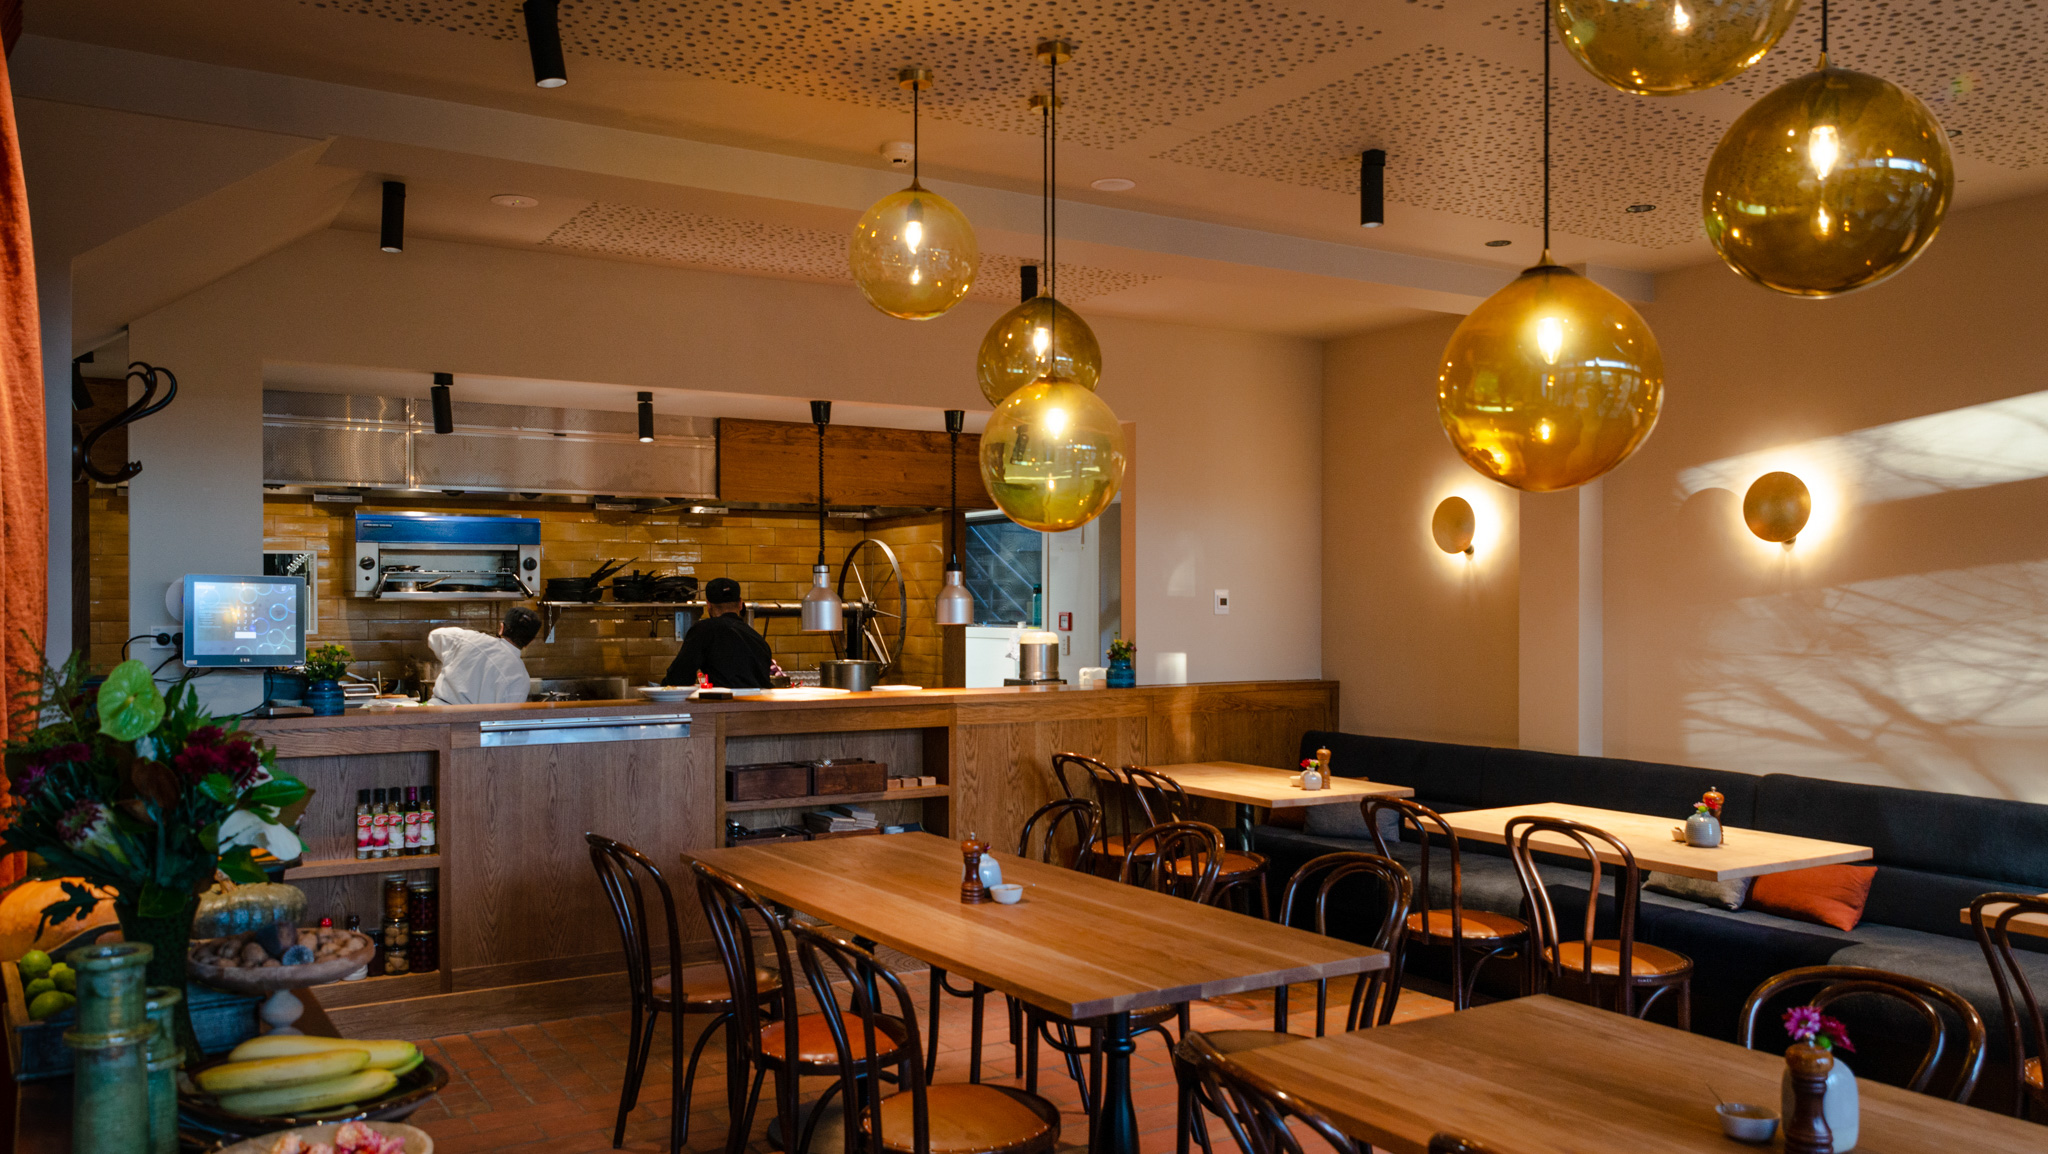 Restaurant fitout by local Dunedin business